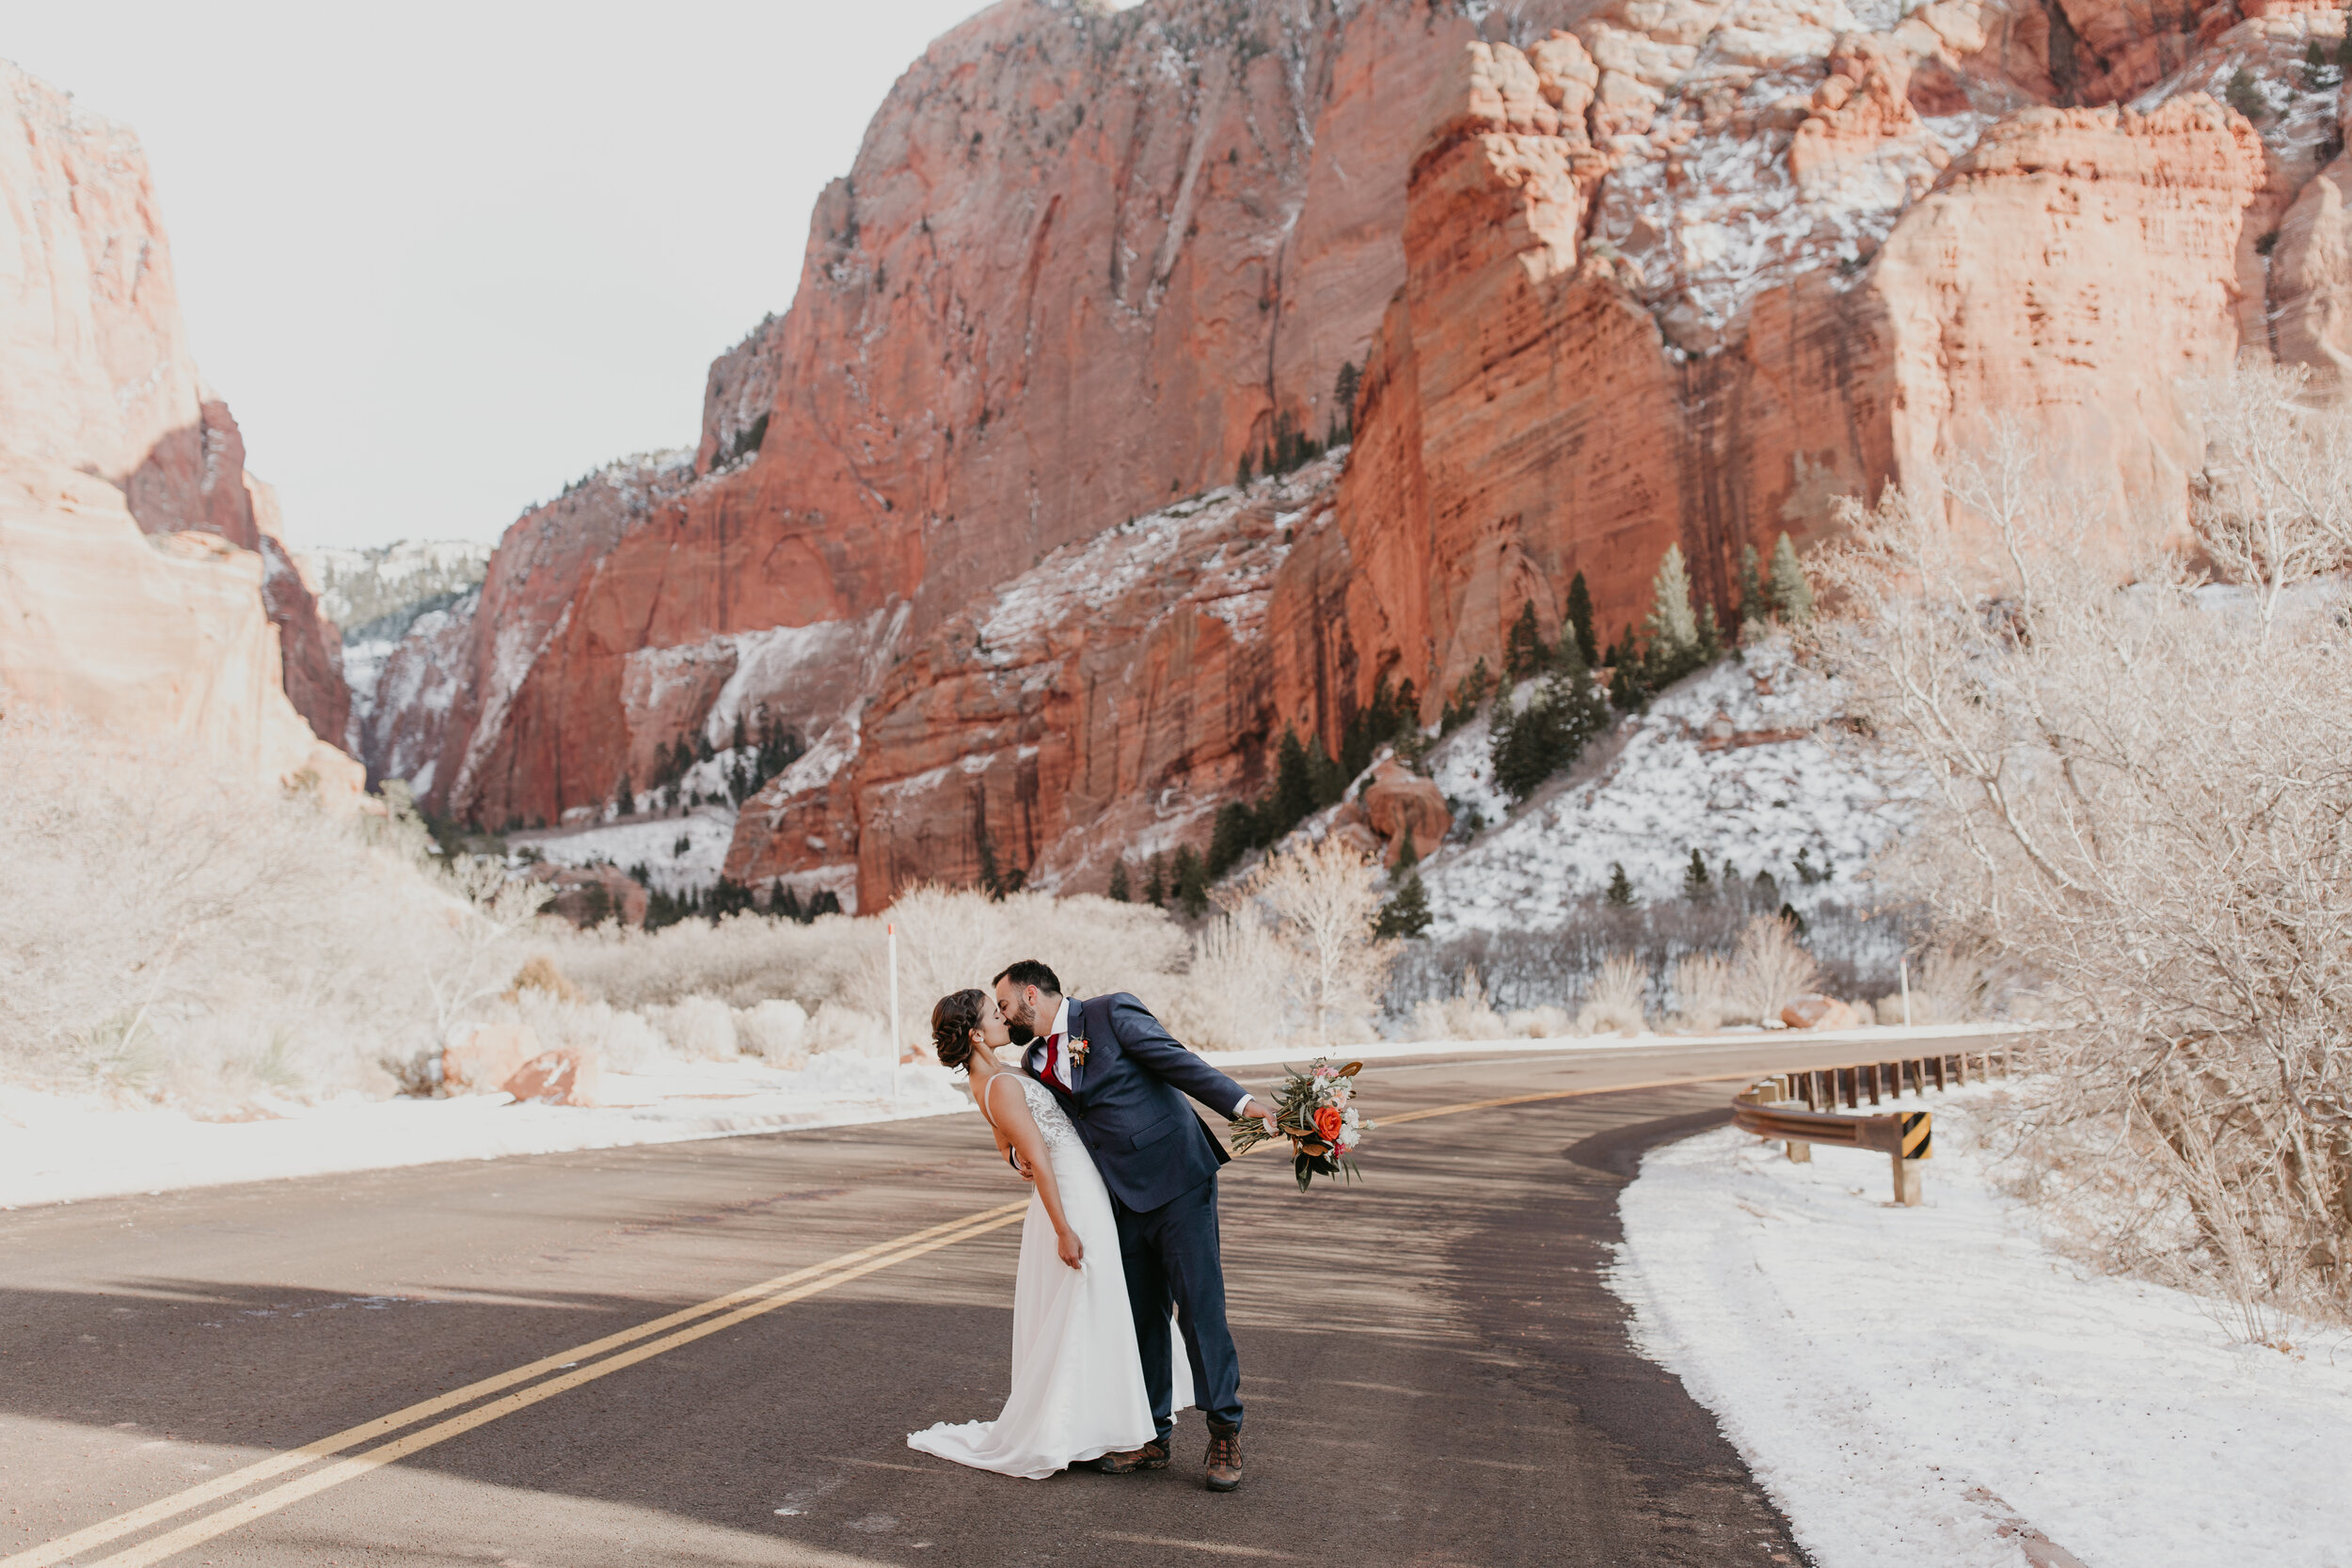 Nicole-Daacke-Photography-snowy-hiking-elopement-in-zion-national-park-zion-elopement-photographer-canyon-overlook-trial-brial-portraits-in-mt-zion-national-park-utah-desert-adventure-elopement-photographer-135.jpg